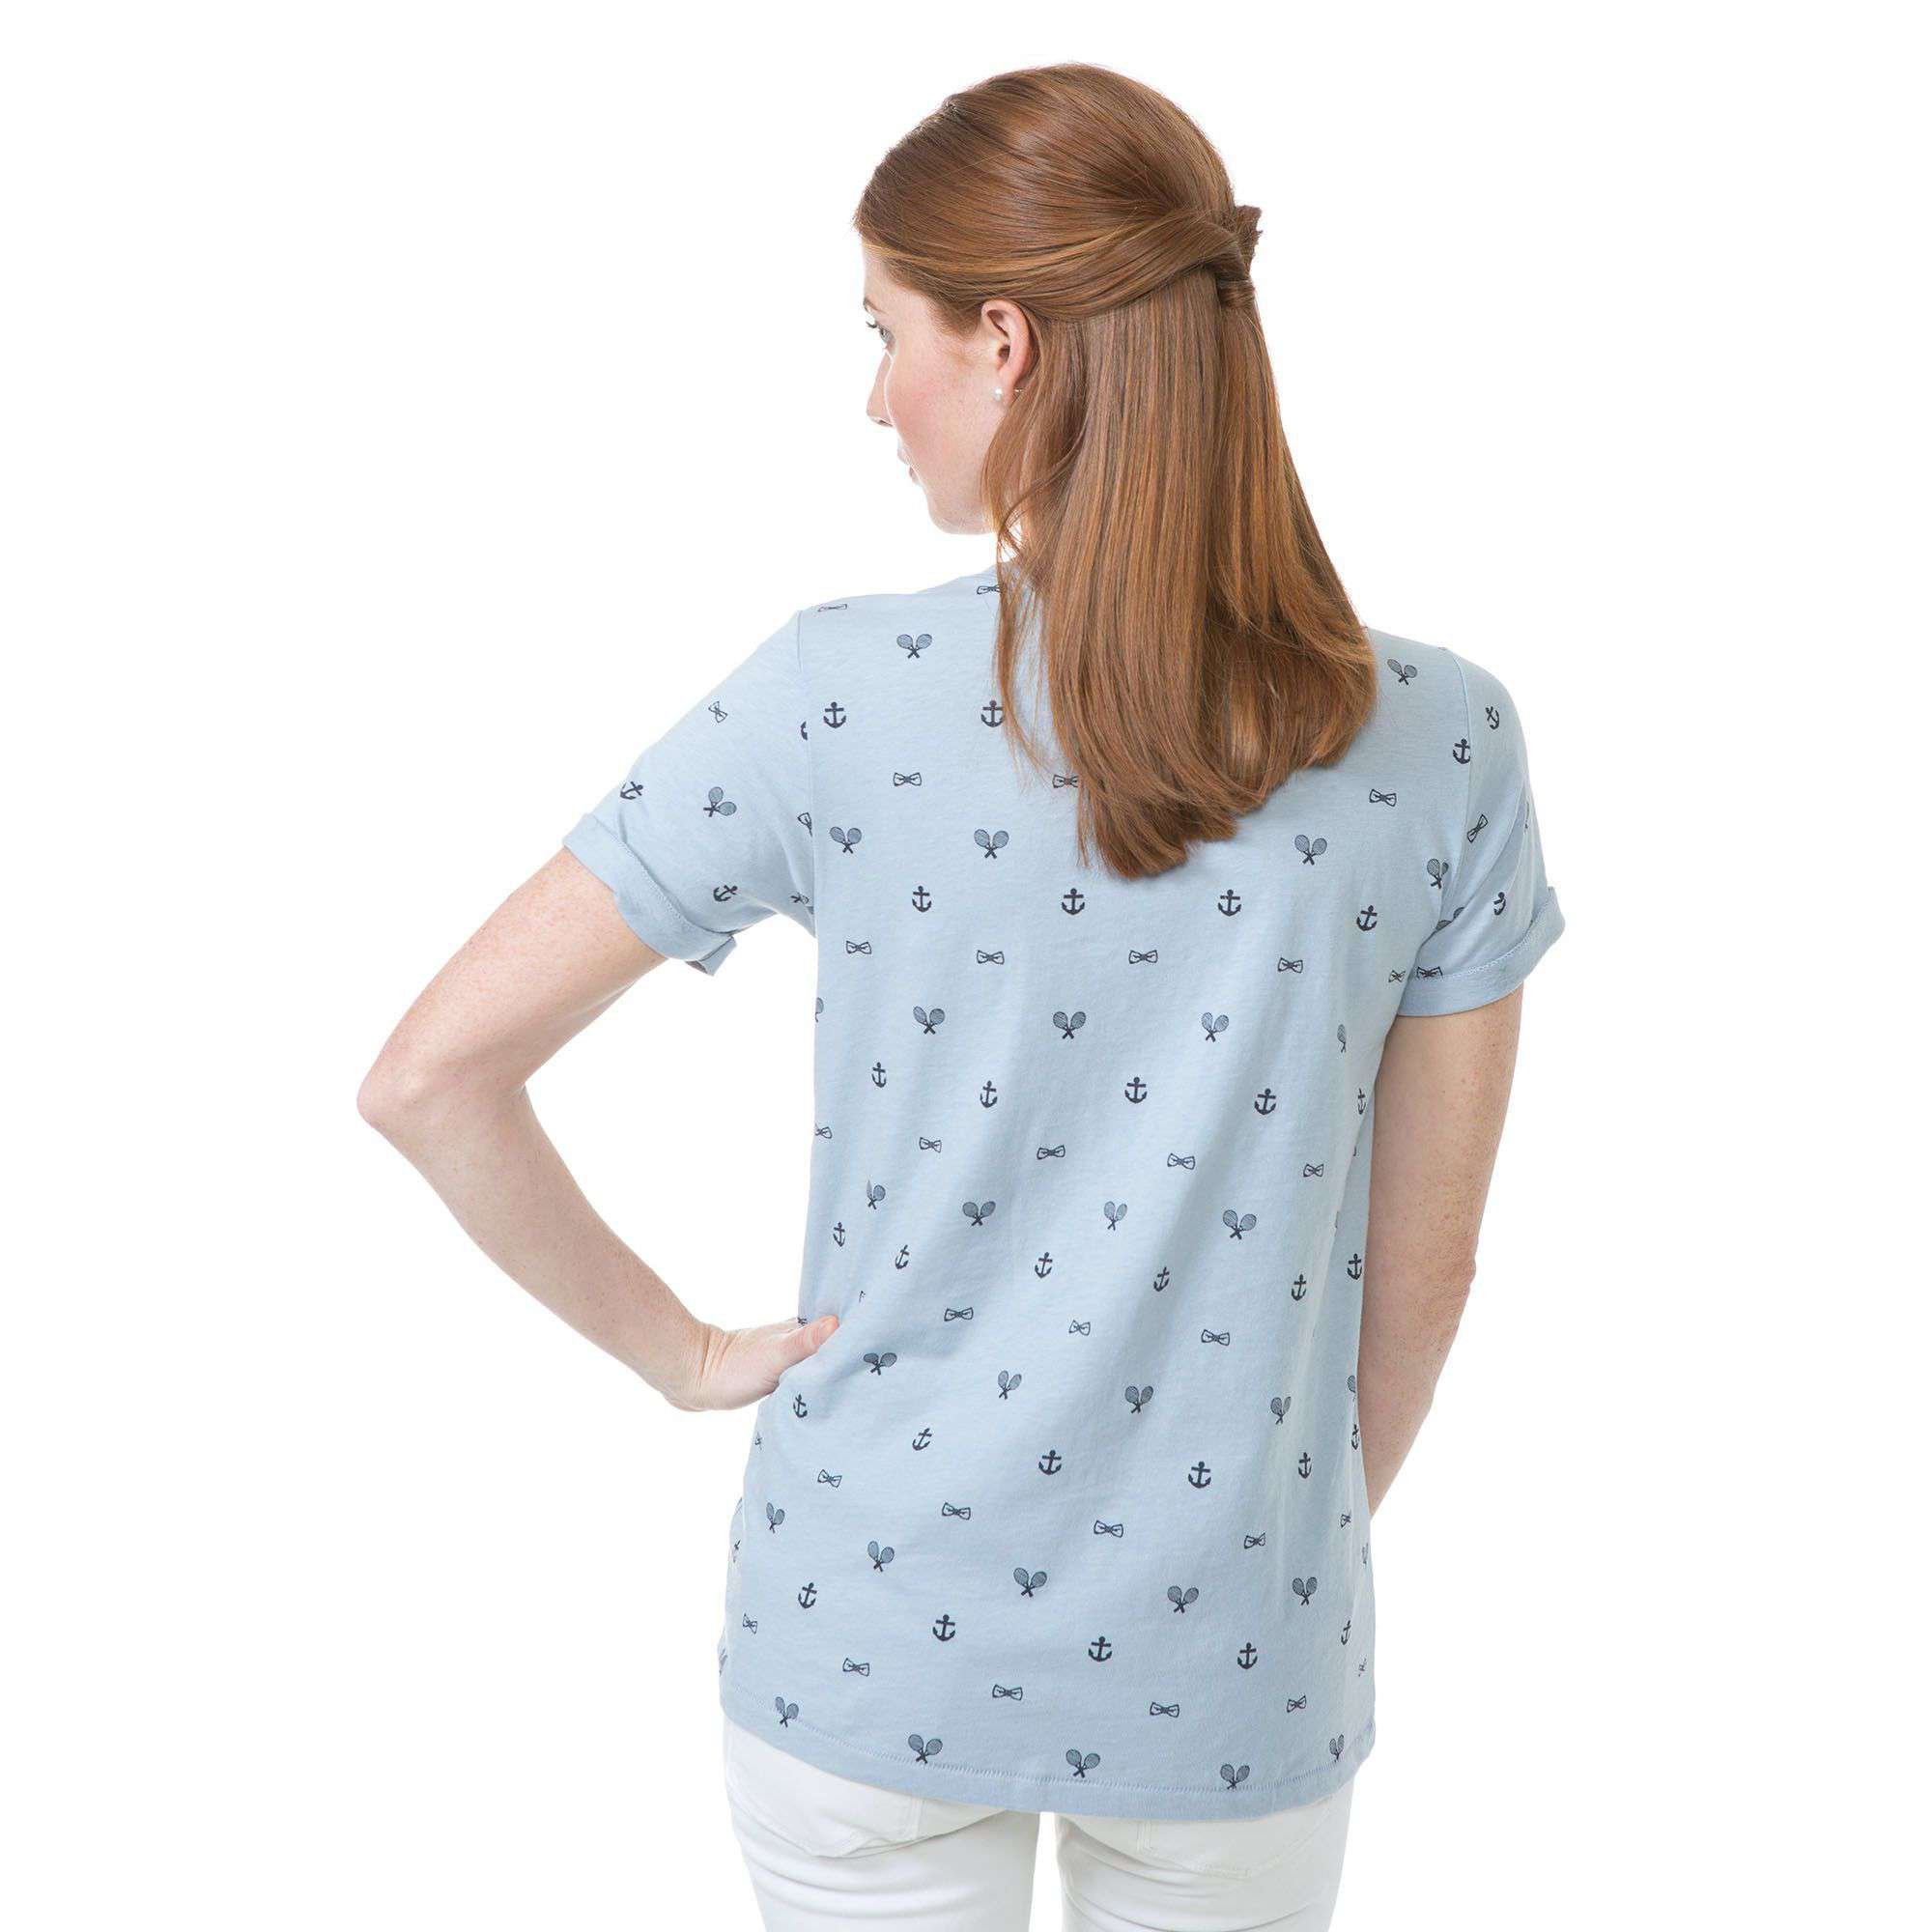 Critter Tee in Hydrangea Blue by Southern Proper - Country Club Prep